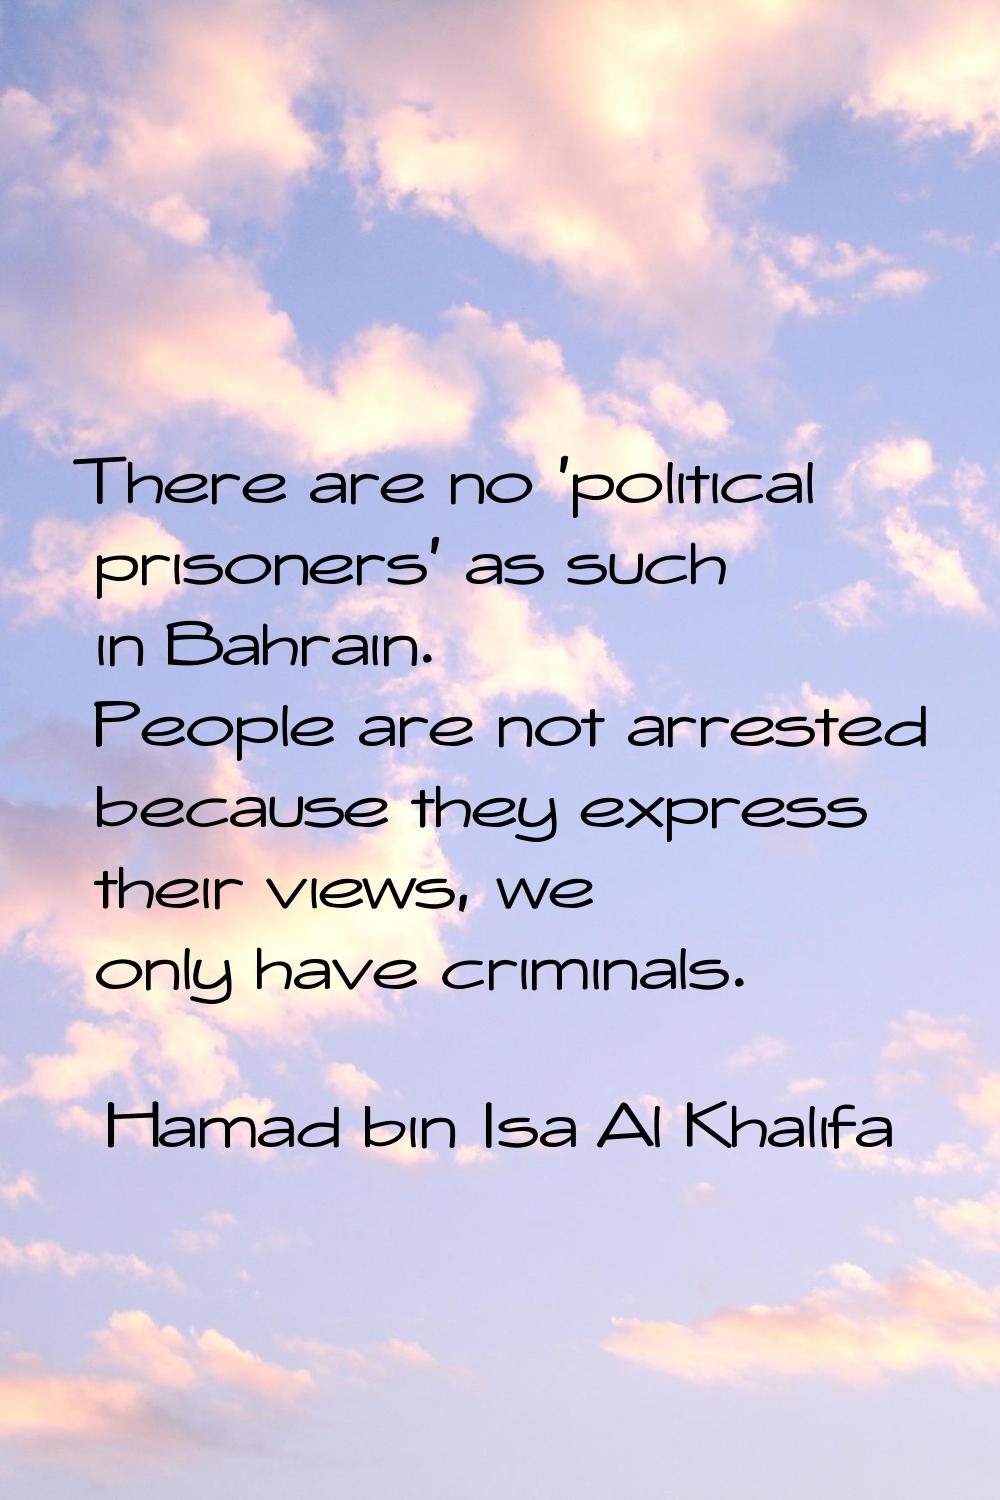 There are no 'political prisoners' as such in Bahrain. People are not arrested because they express